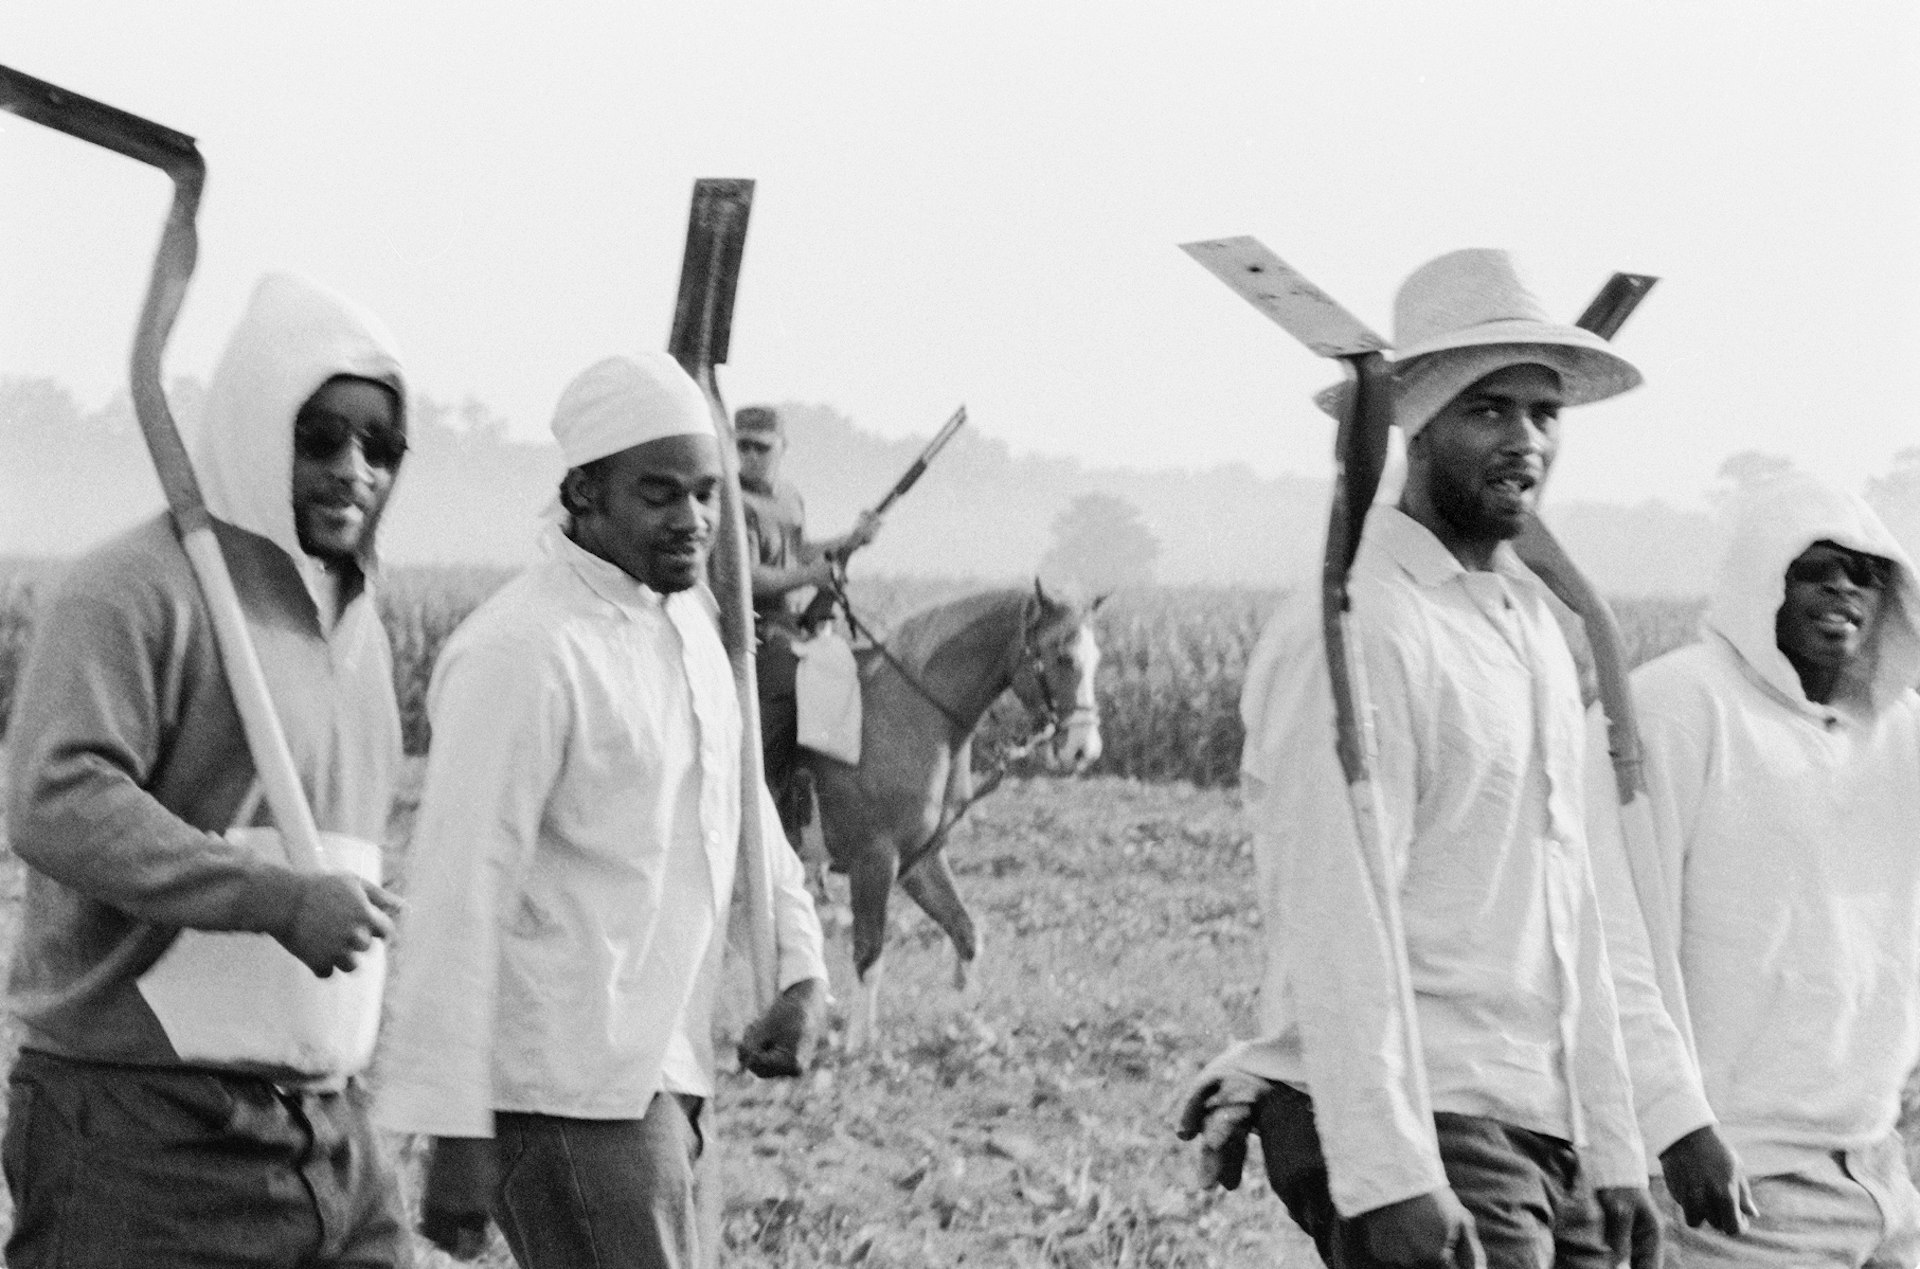 Chandra McCormick. MEN GOING TO WORK IN THE FIELDS OF ANGOLA, 2004.